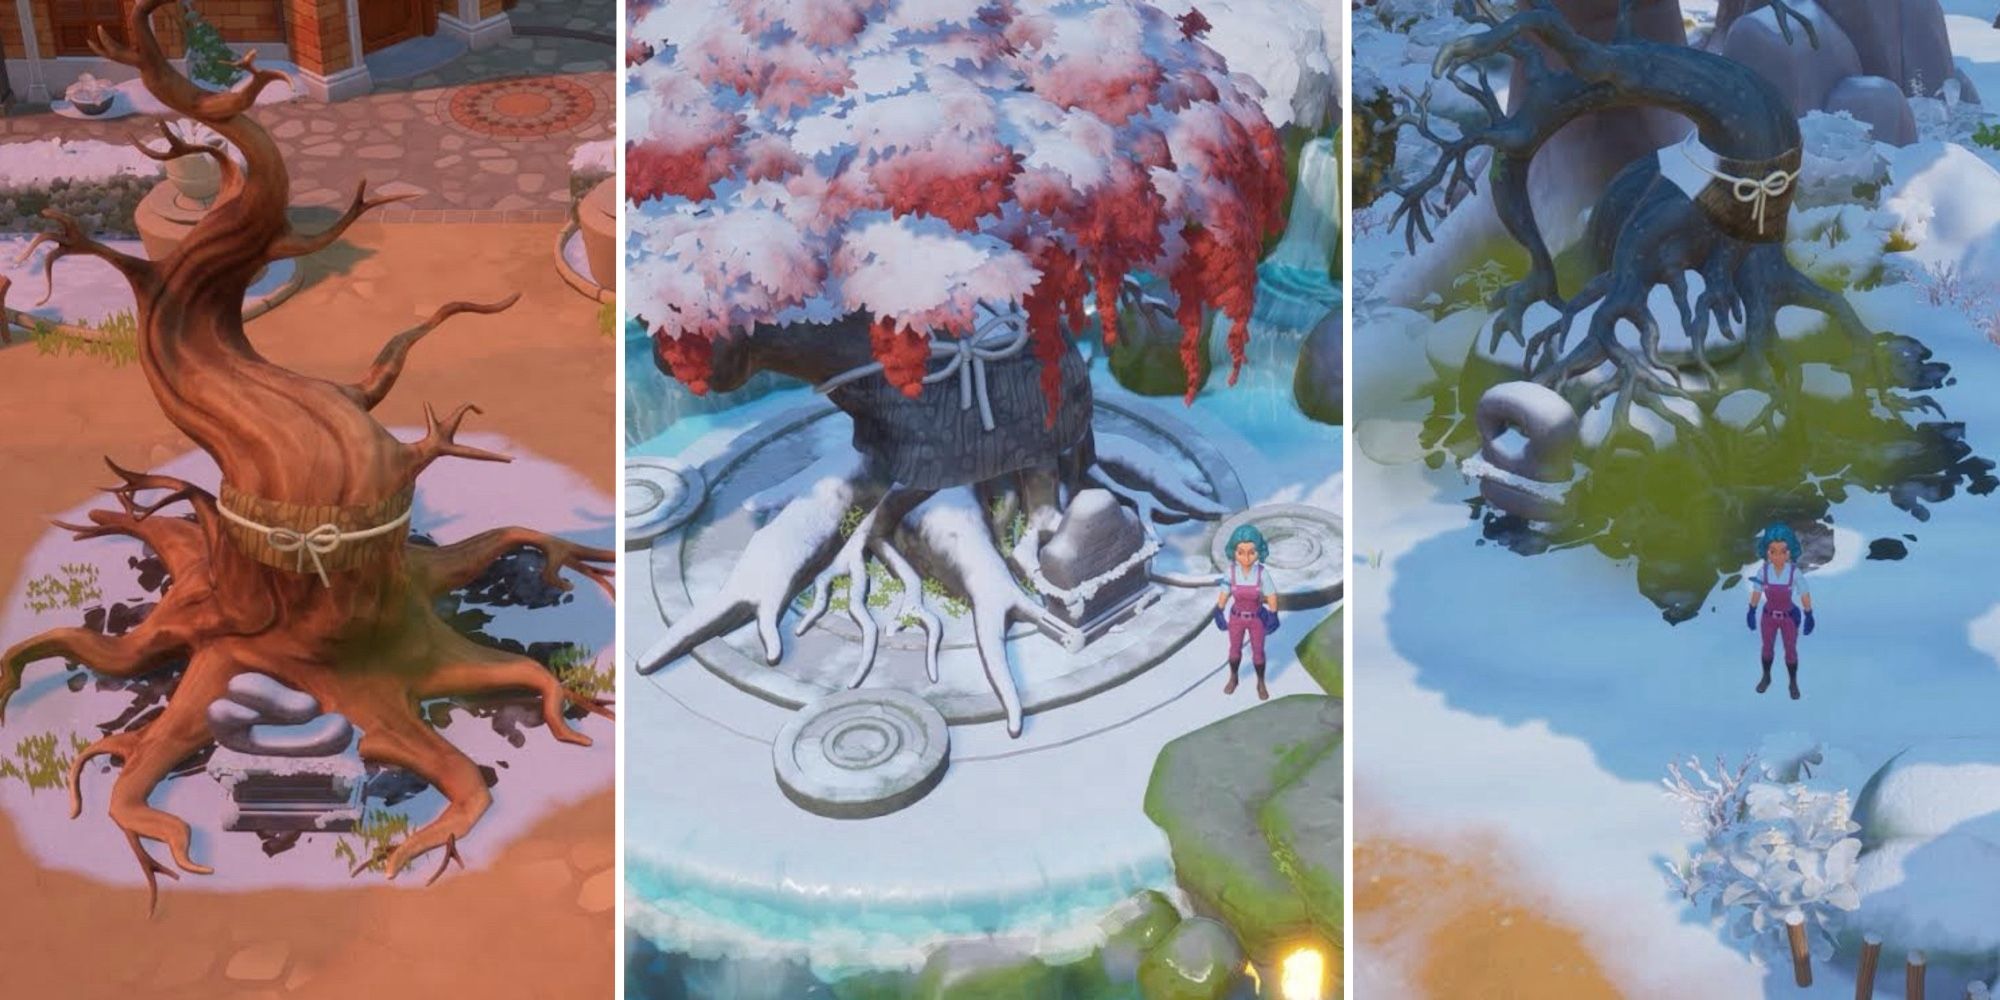 Coral Island avatar standing next to a large tree with red leaves in the center panel. In the right panel, the avatar is standing next to a different tree with a green mist cloud surrounding the base of the tree. In the left panel, is another tree with a building just visible in the top of the image behind it. 